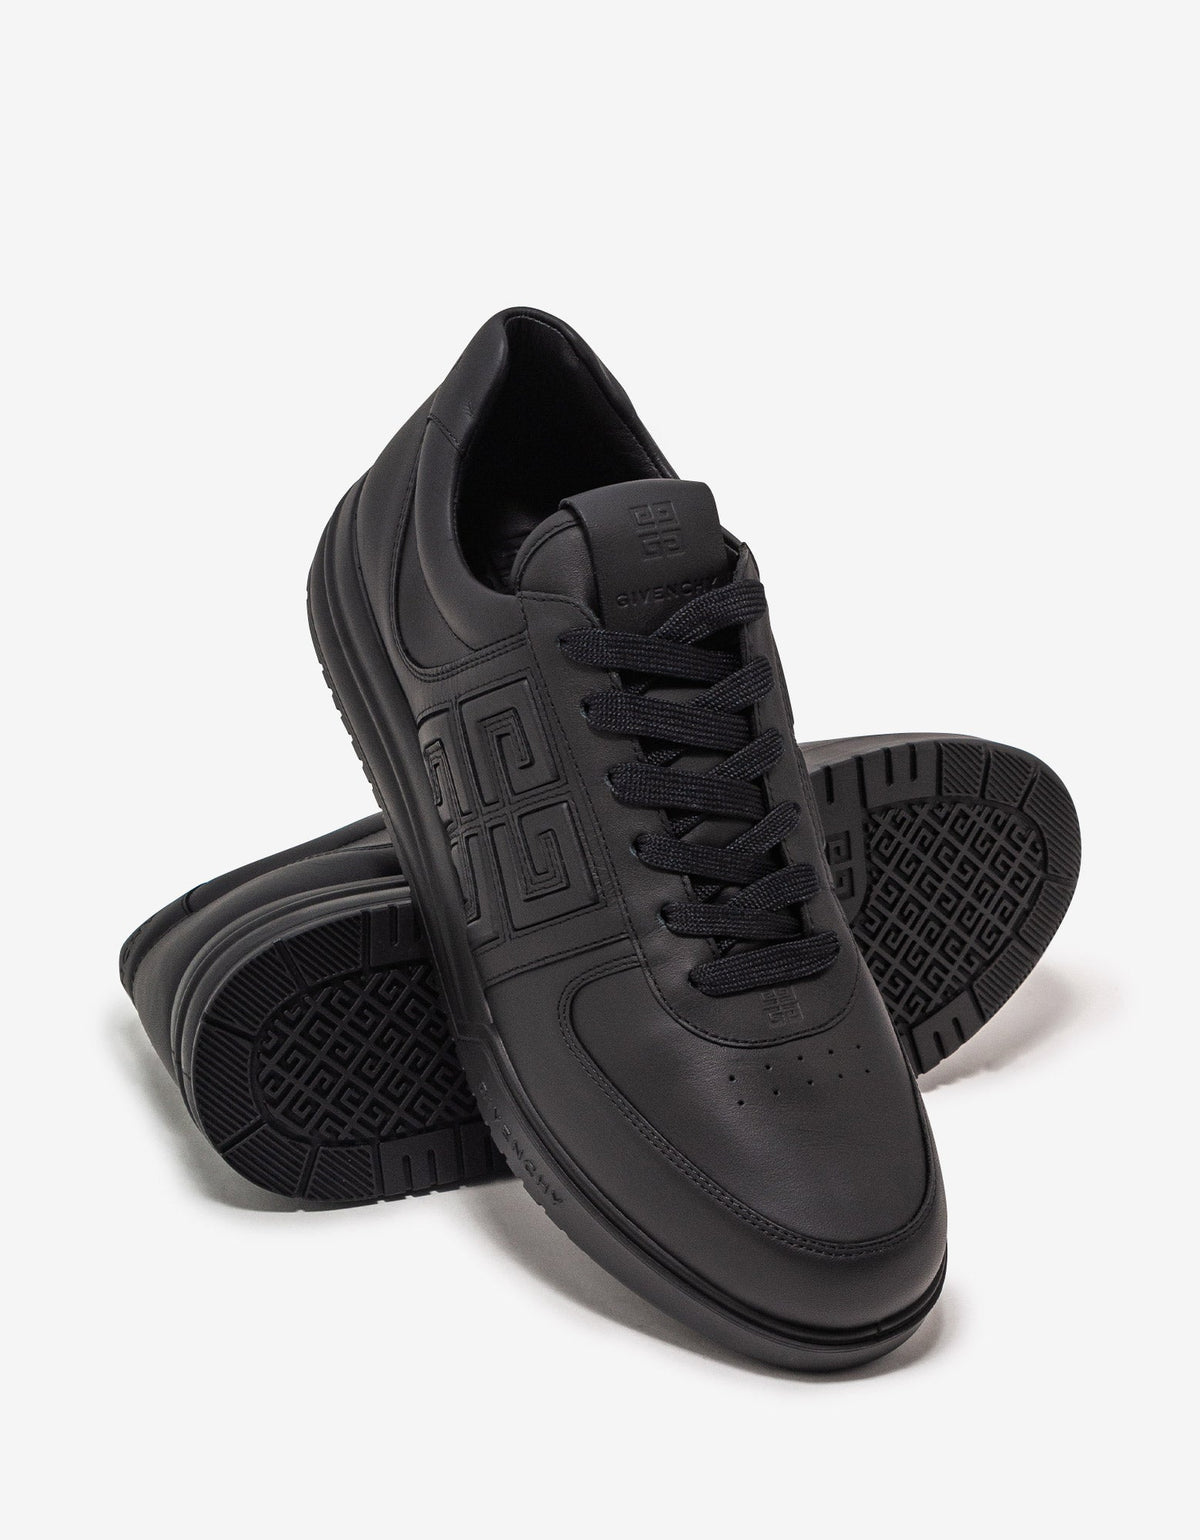 Givenchy Black G4 Logo Leather Trainers